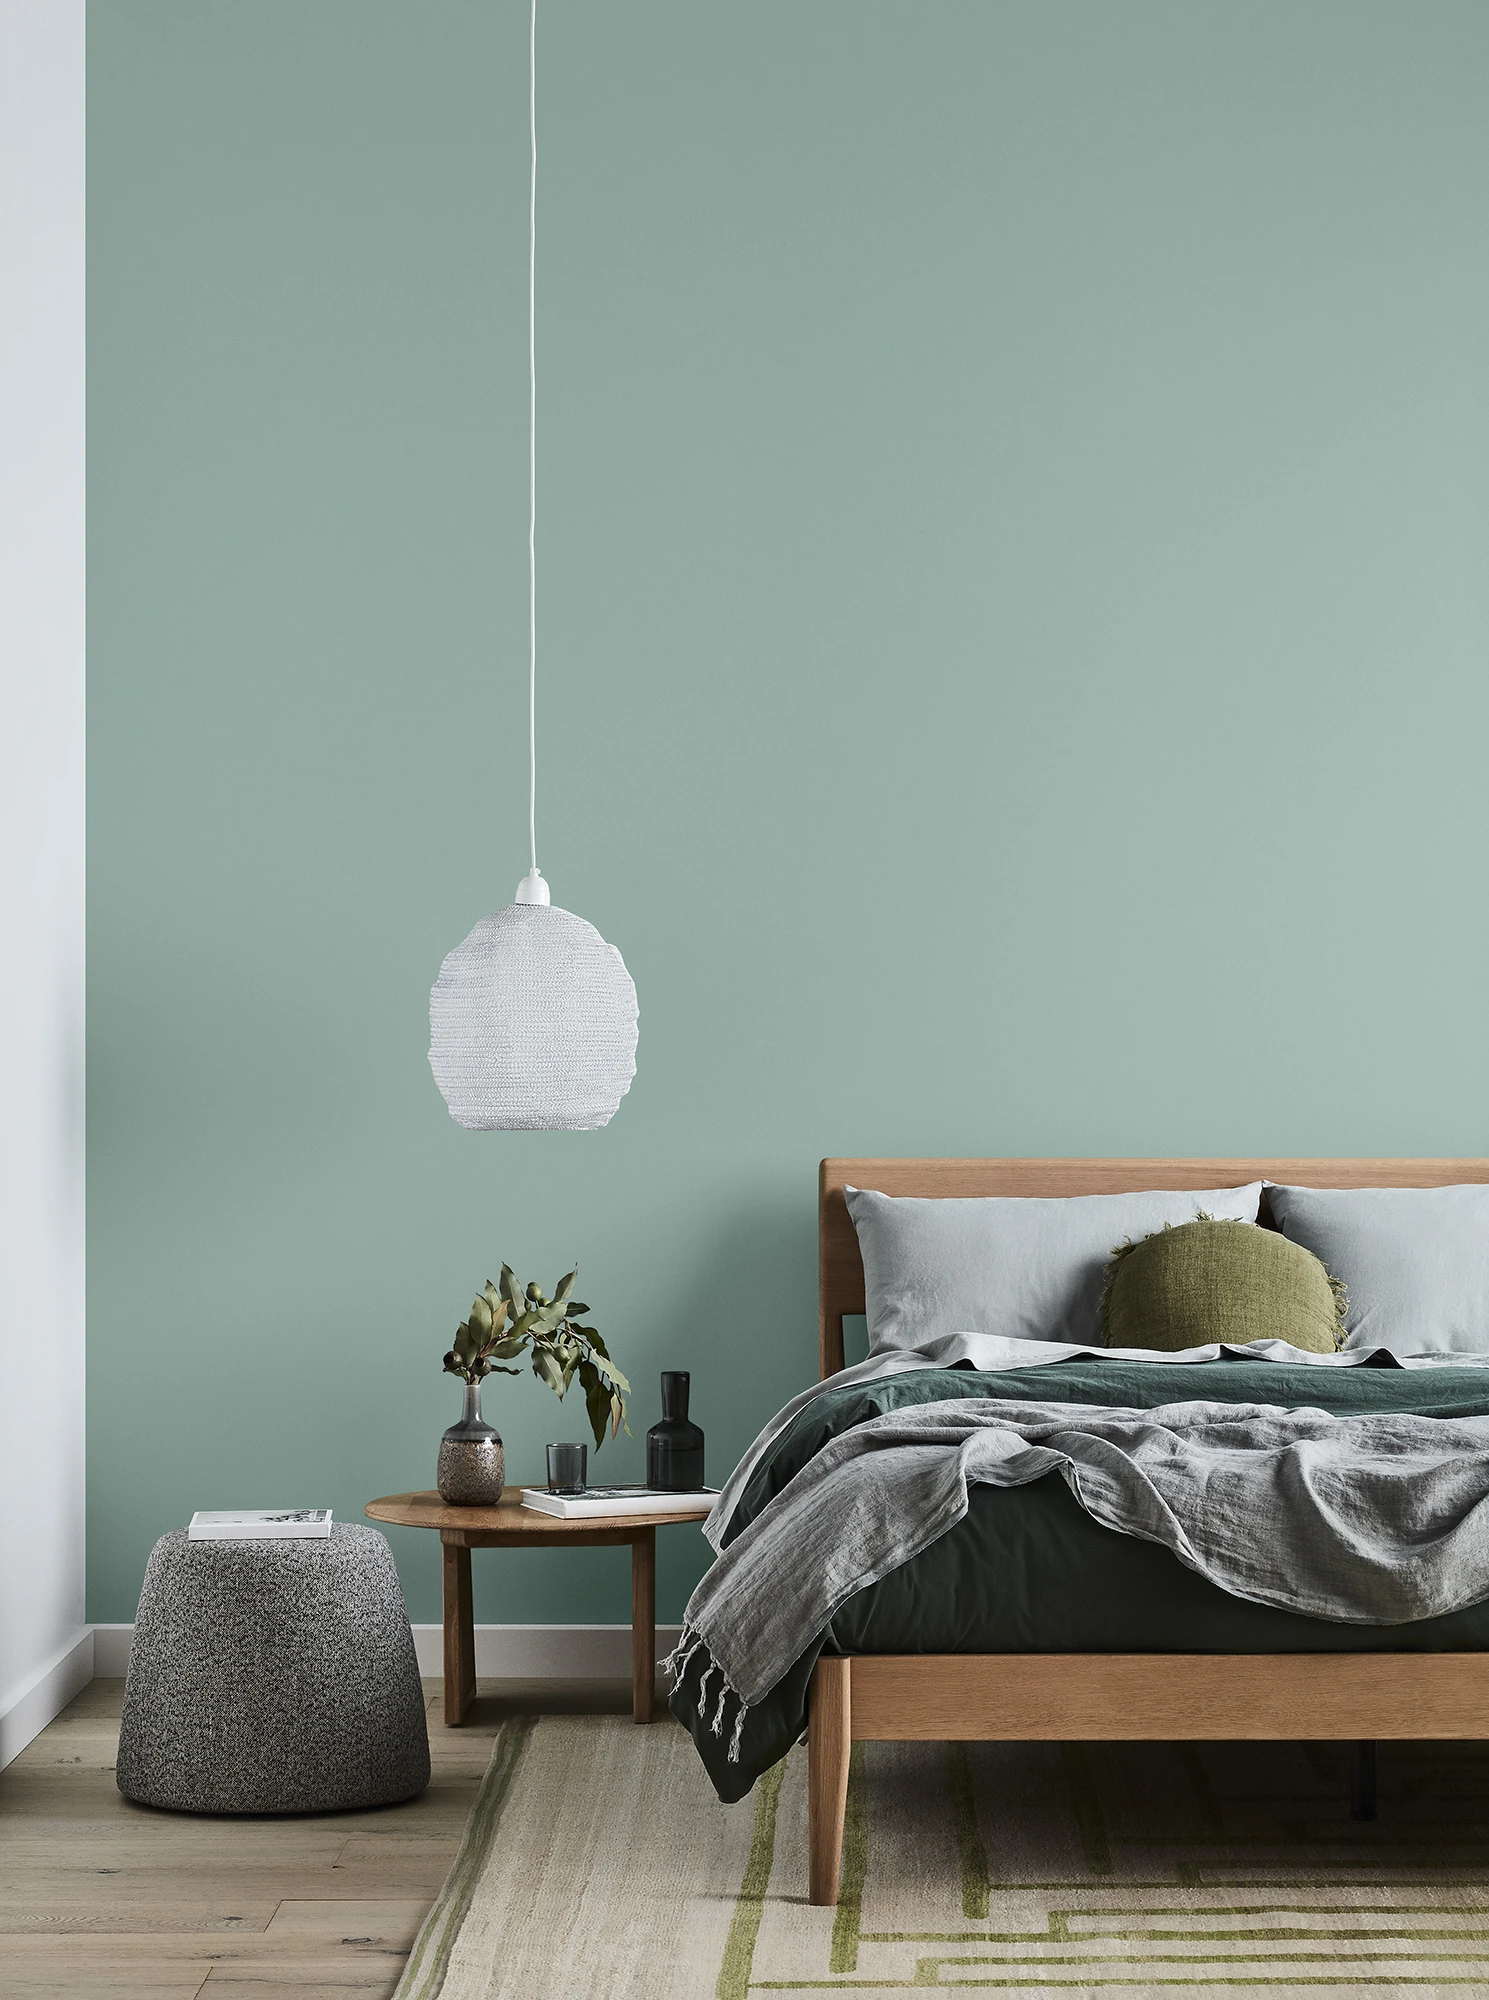 Green themed bedroom with bed, hanging lamp and bedside table to left.